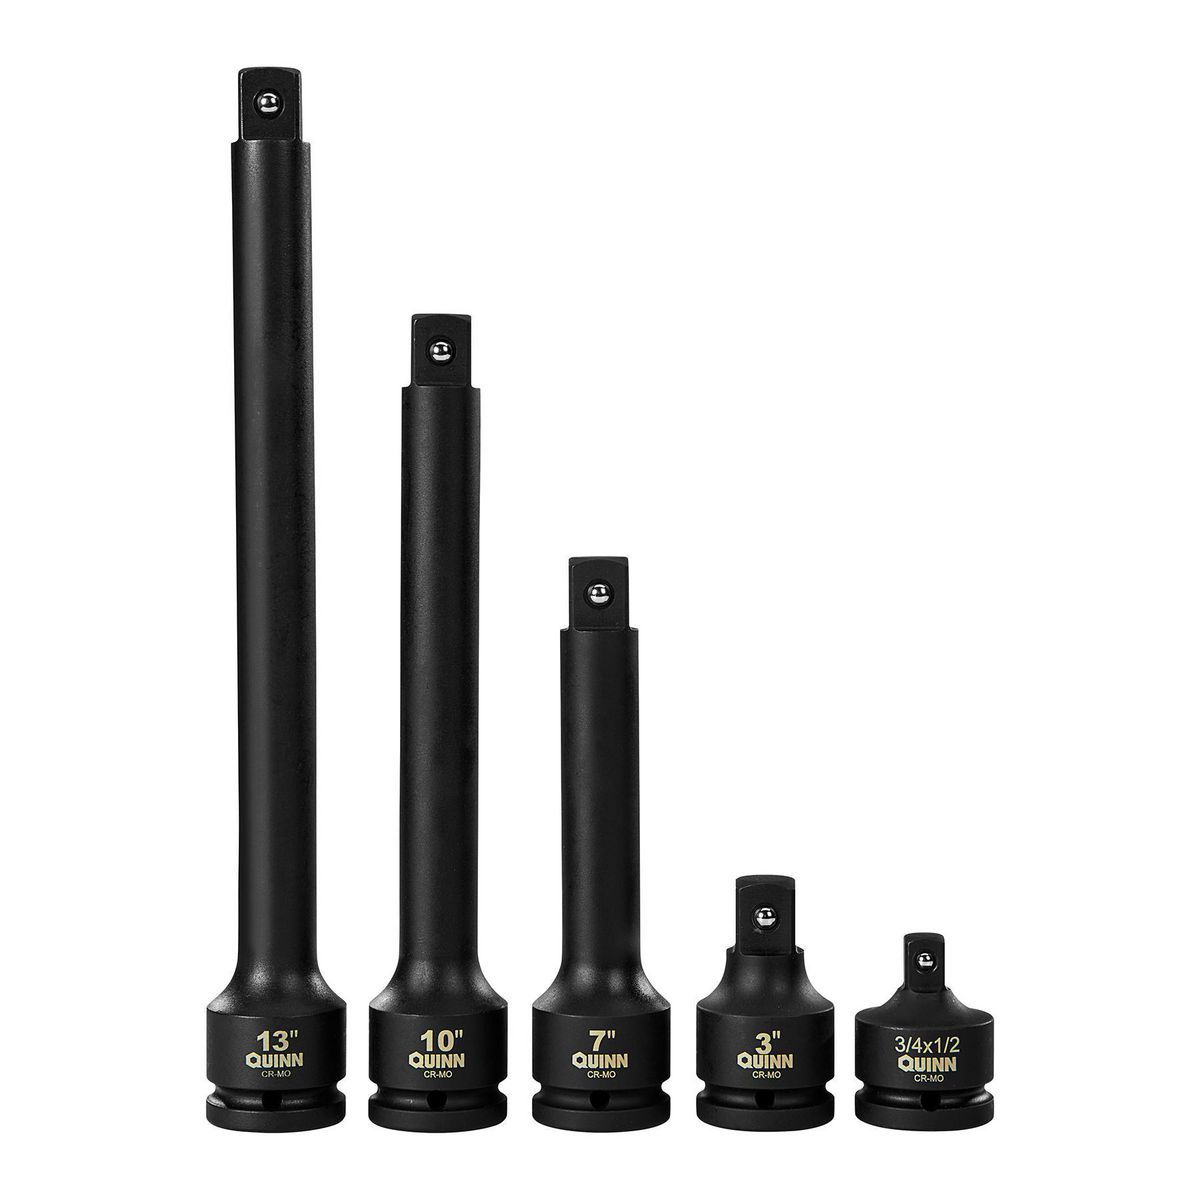 3/4 in. Drive Impact Socket Adapter and Extension Set, 5-Piece